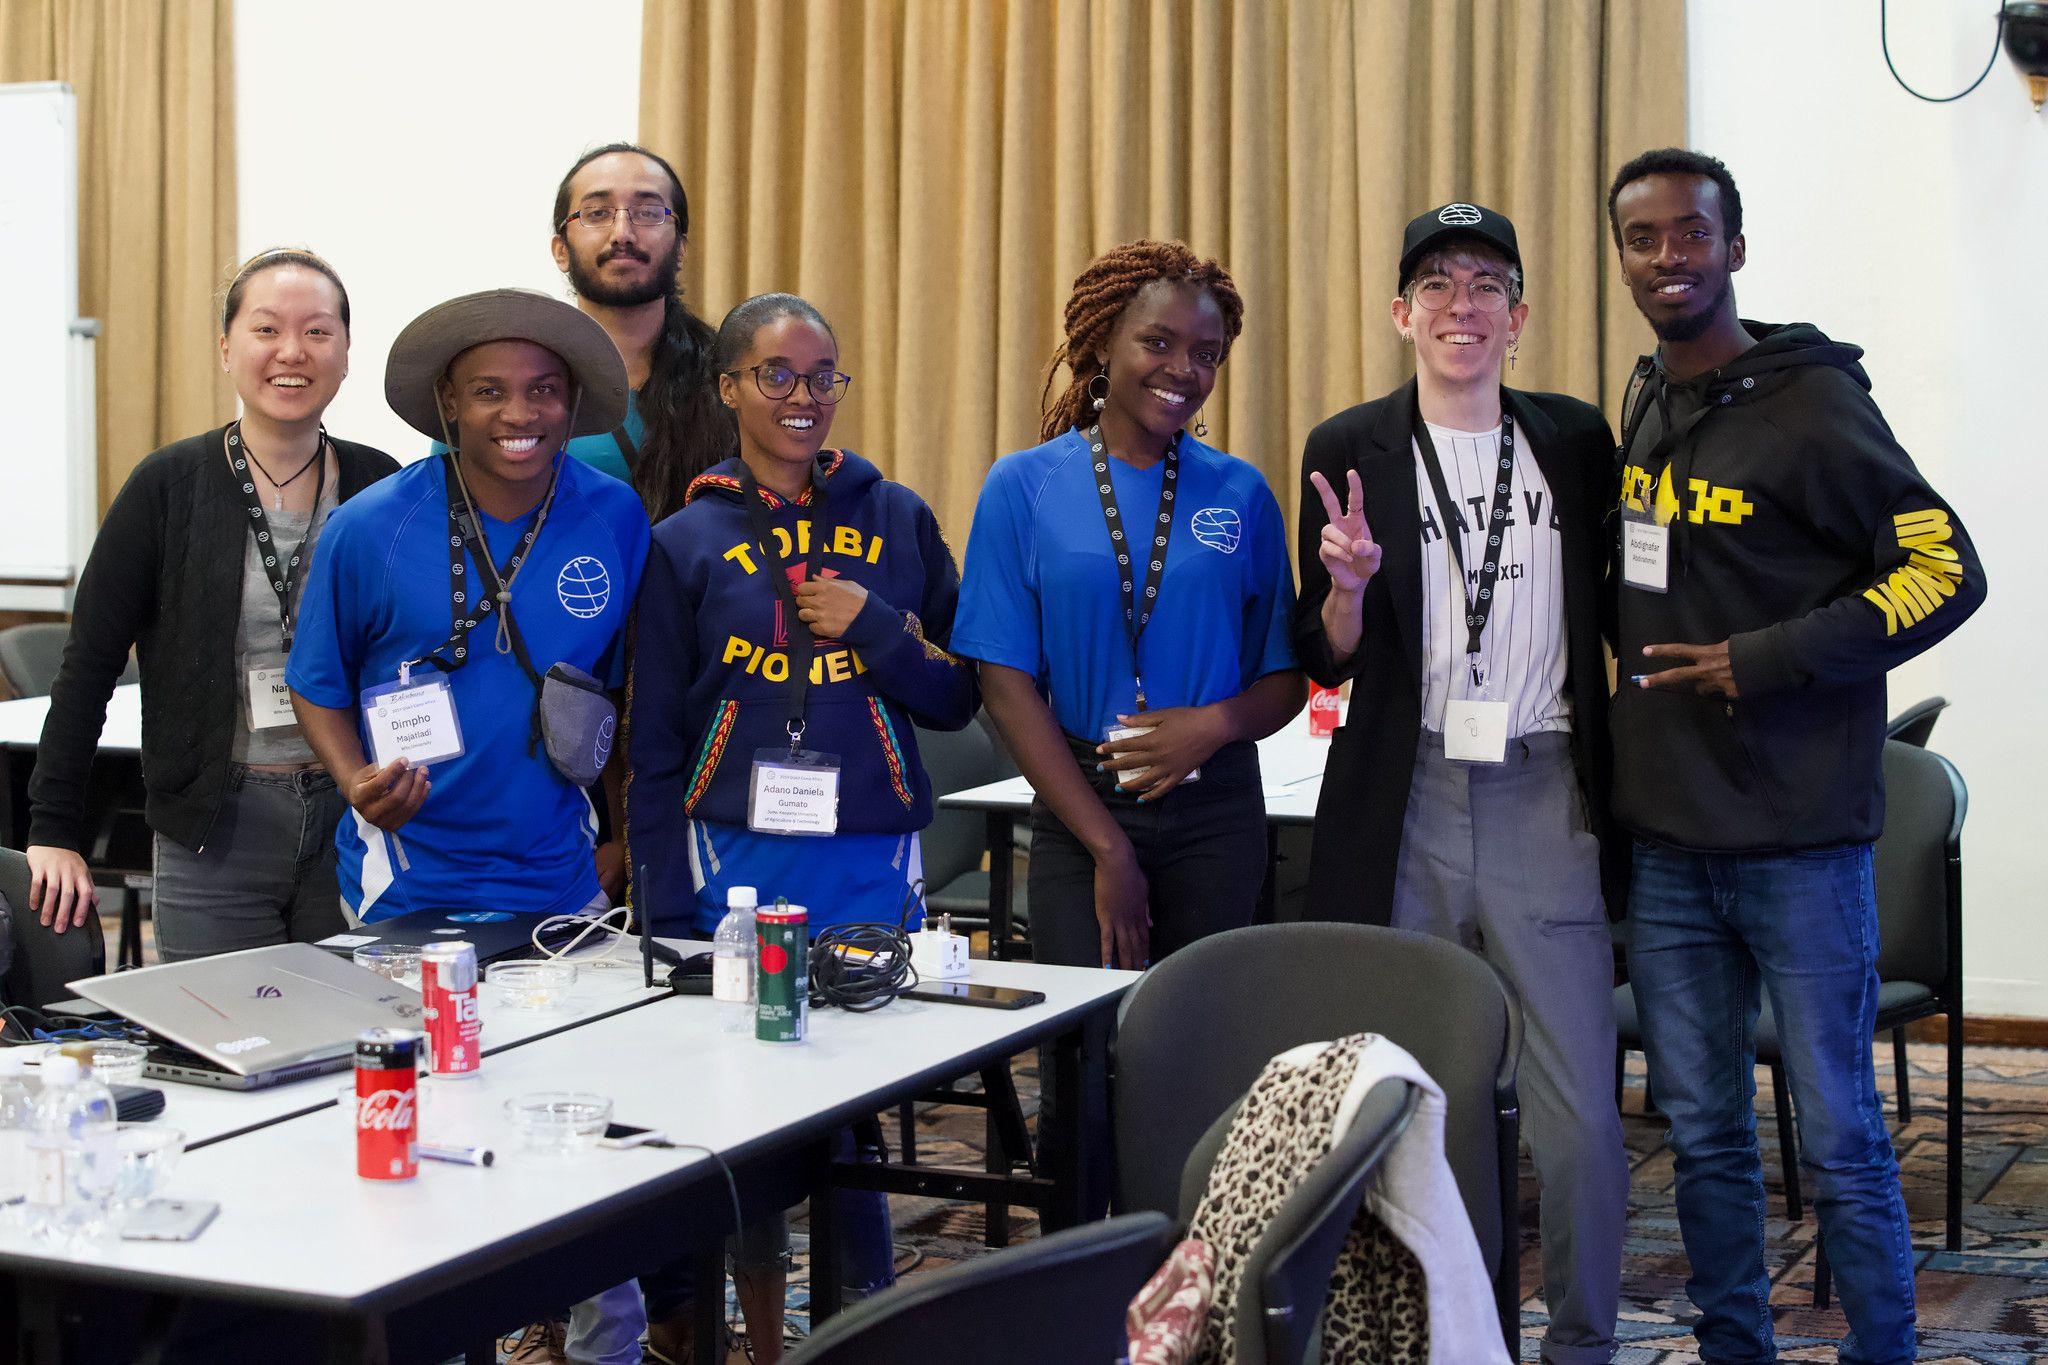 Photograph of seven attendees of Qiskit Camp 2019 smiling